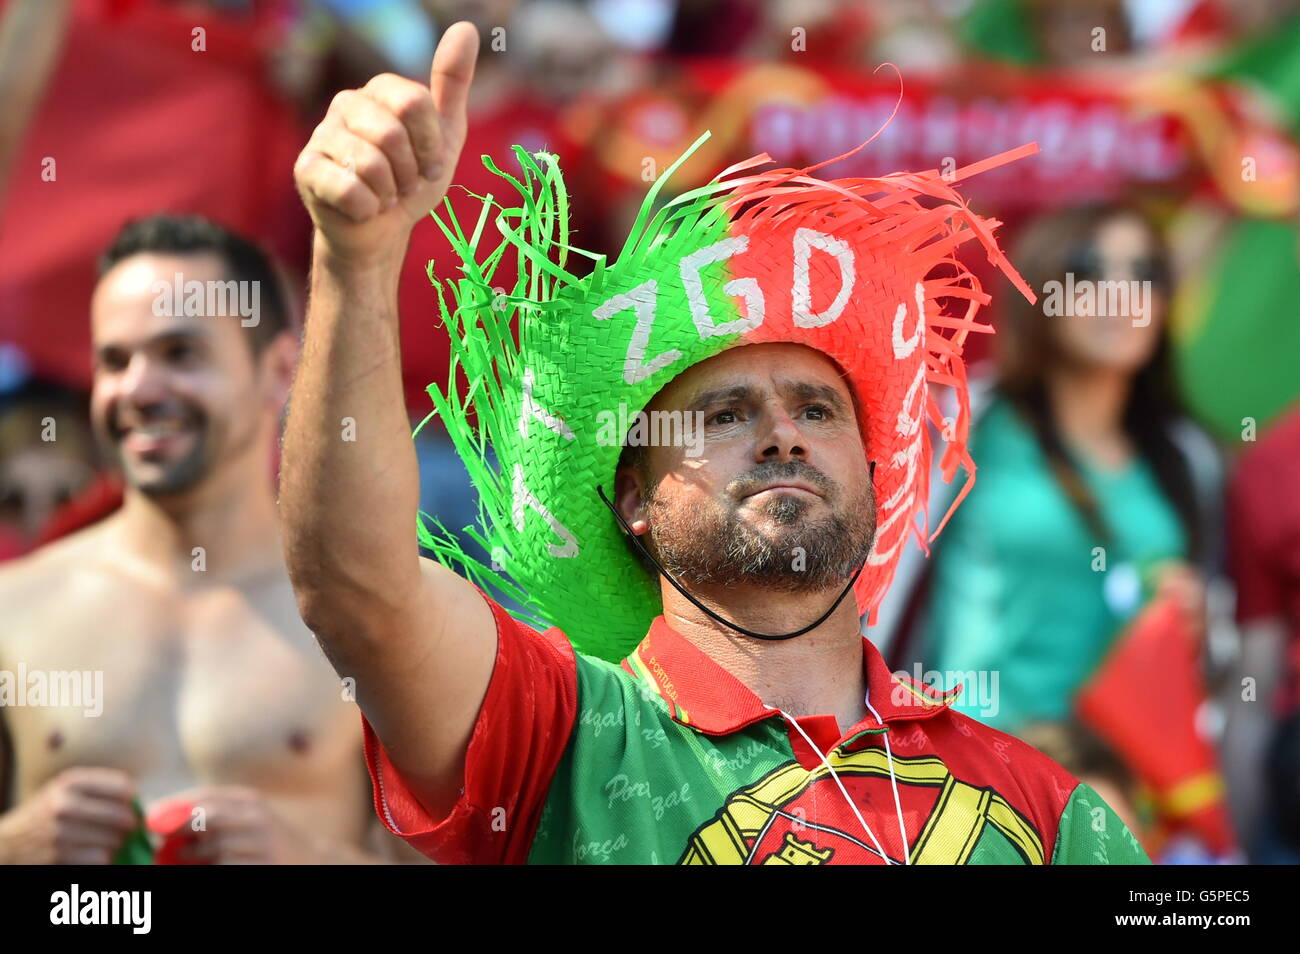 Lyon, France. 22nd June, 2016. Supporters of Portugal cheer prior to the UEFA Euro 2016 Group F soccer match between Hungary and Portugal at the Stade de Lyon in Lyon, France, 22 June 2016. Photo: Uwe Anspach/dpa/Alamy Live News Stock Photo